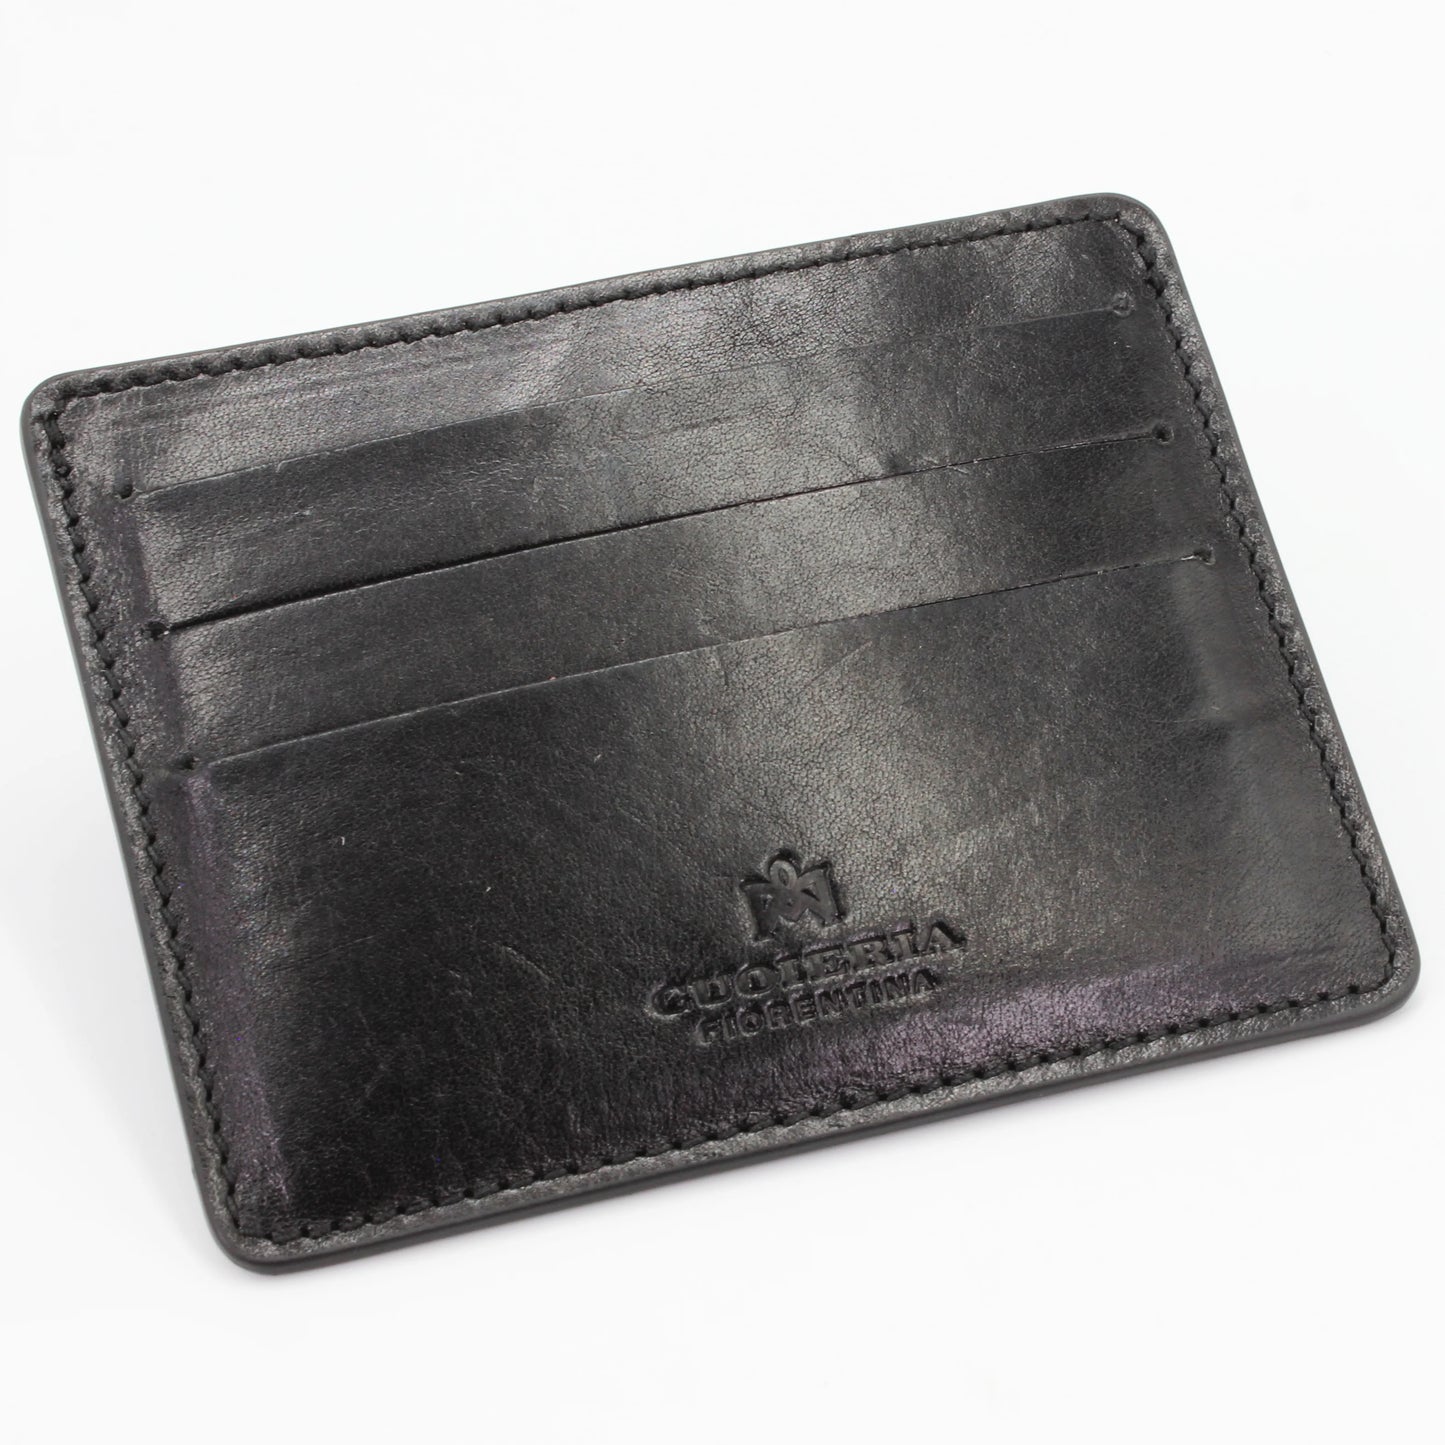 Shop our Italian-made Cuoieria Fiorentina Italian leather card holder in nero (P000000012735) or browse our range of Italian wallets and purses for men & women in-store at Aliverti Cape Town, or shop online.   We deliver in South Africa & offer multiple payment plans as well as accept multiple safe & secure payment methods.